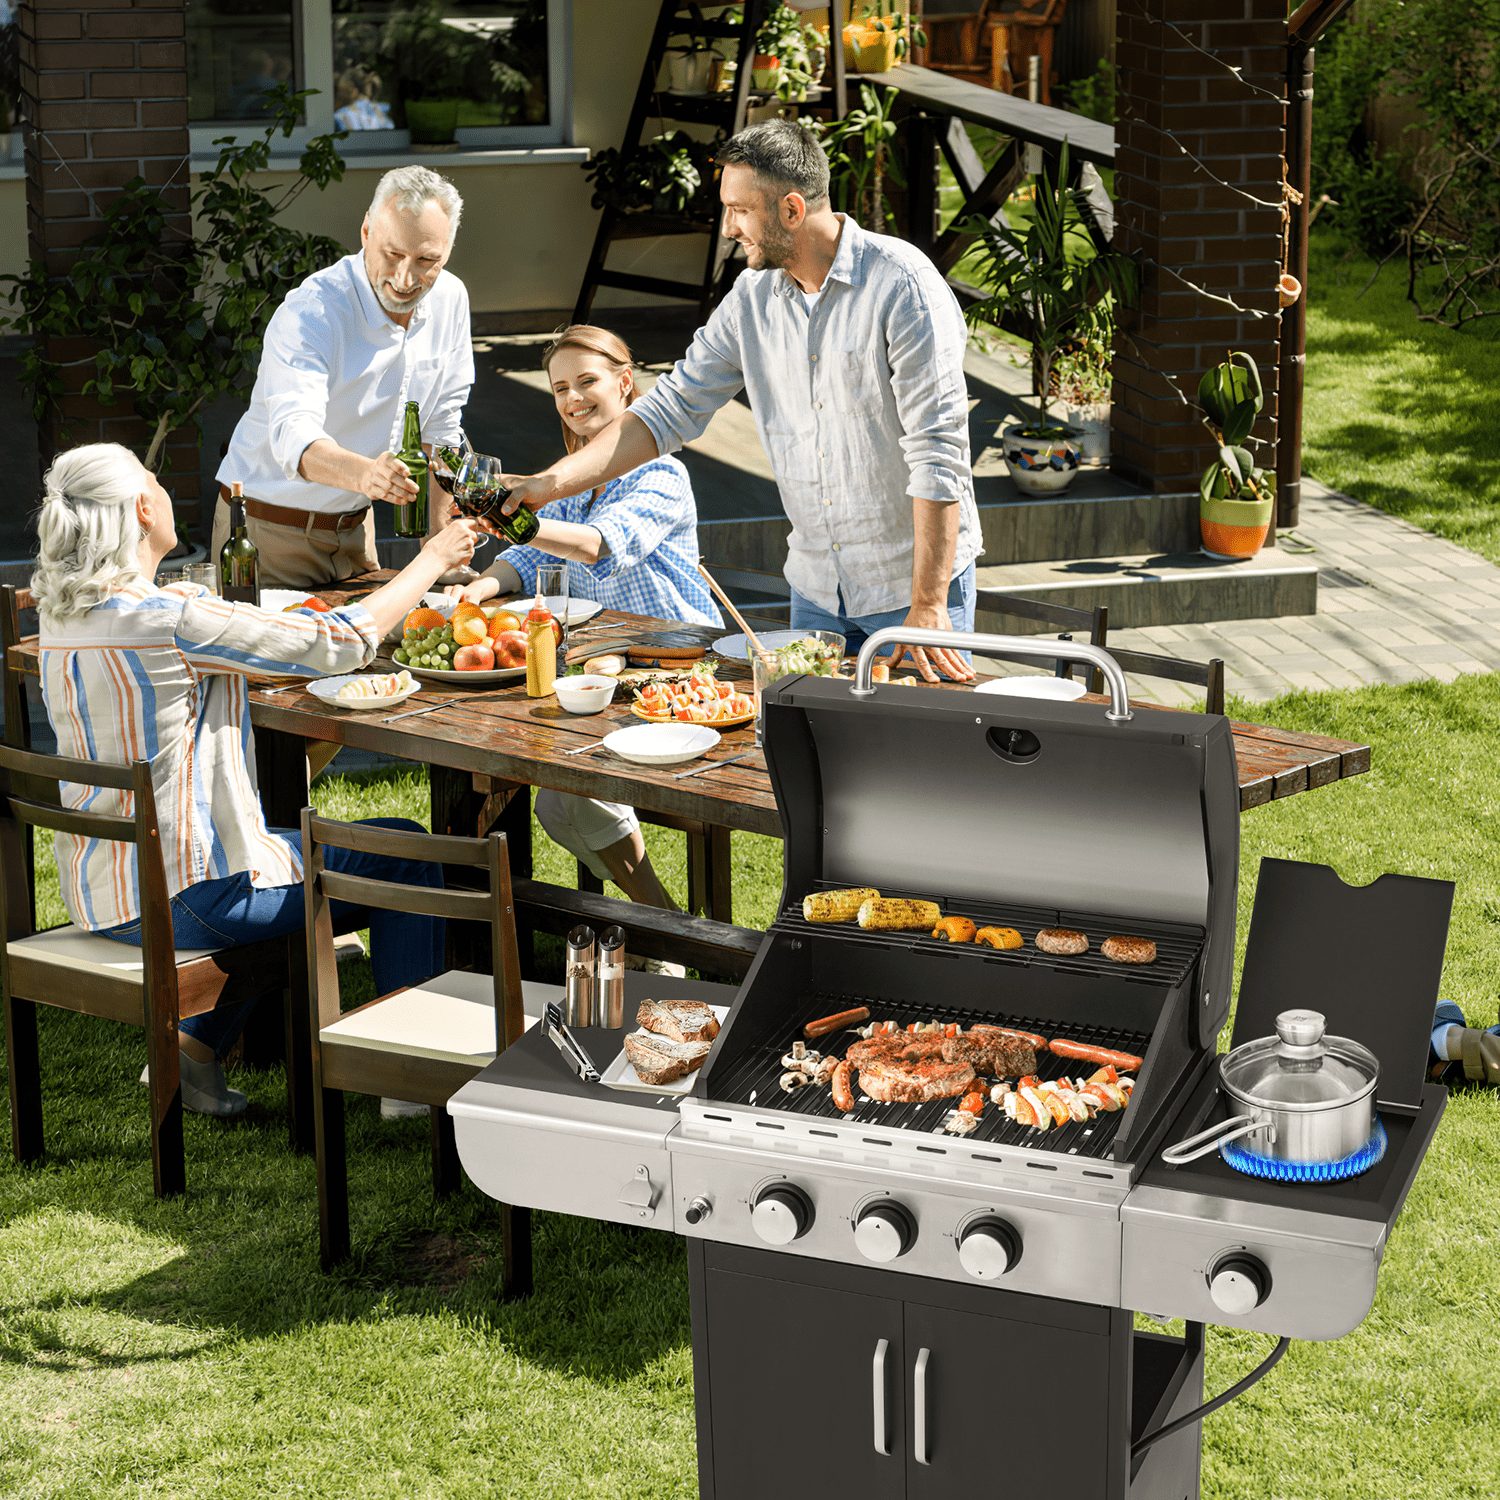 Yoleny 3 Burner BBQ Propane Gas Grill BTU Stainless Steel with Stove and Side Table